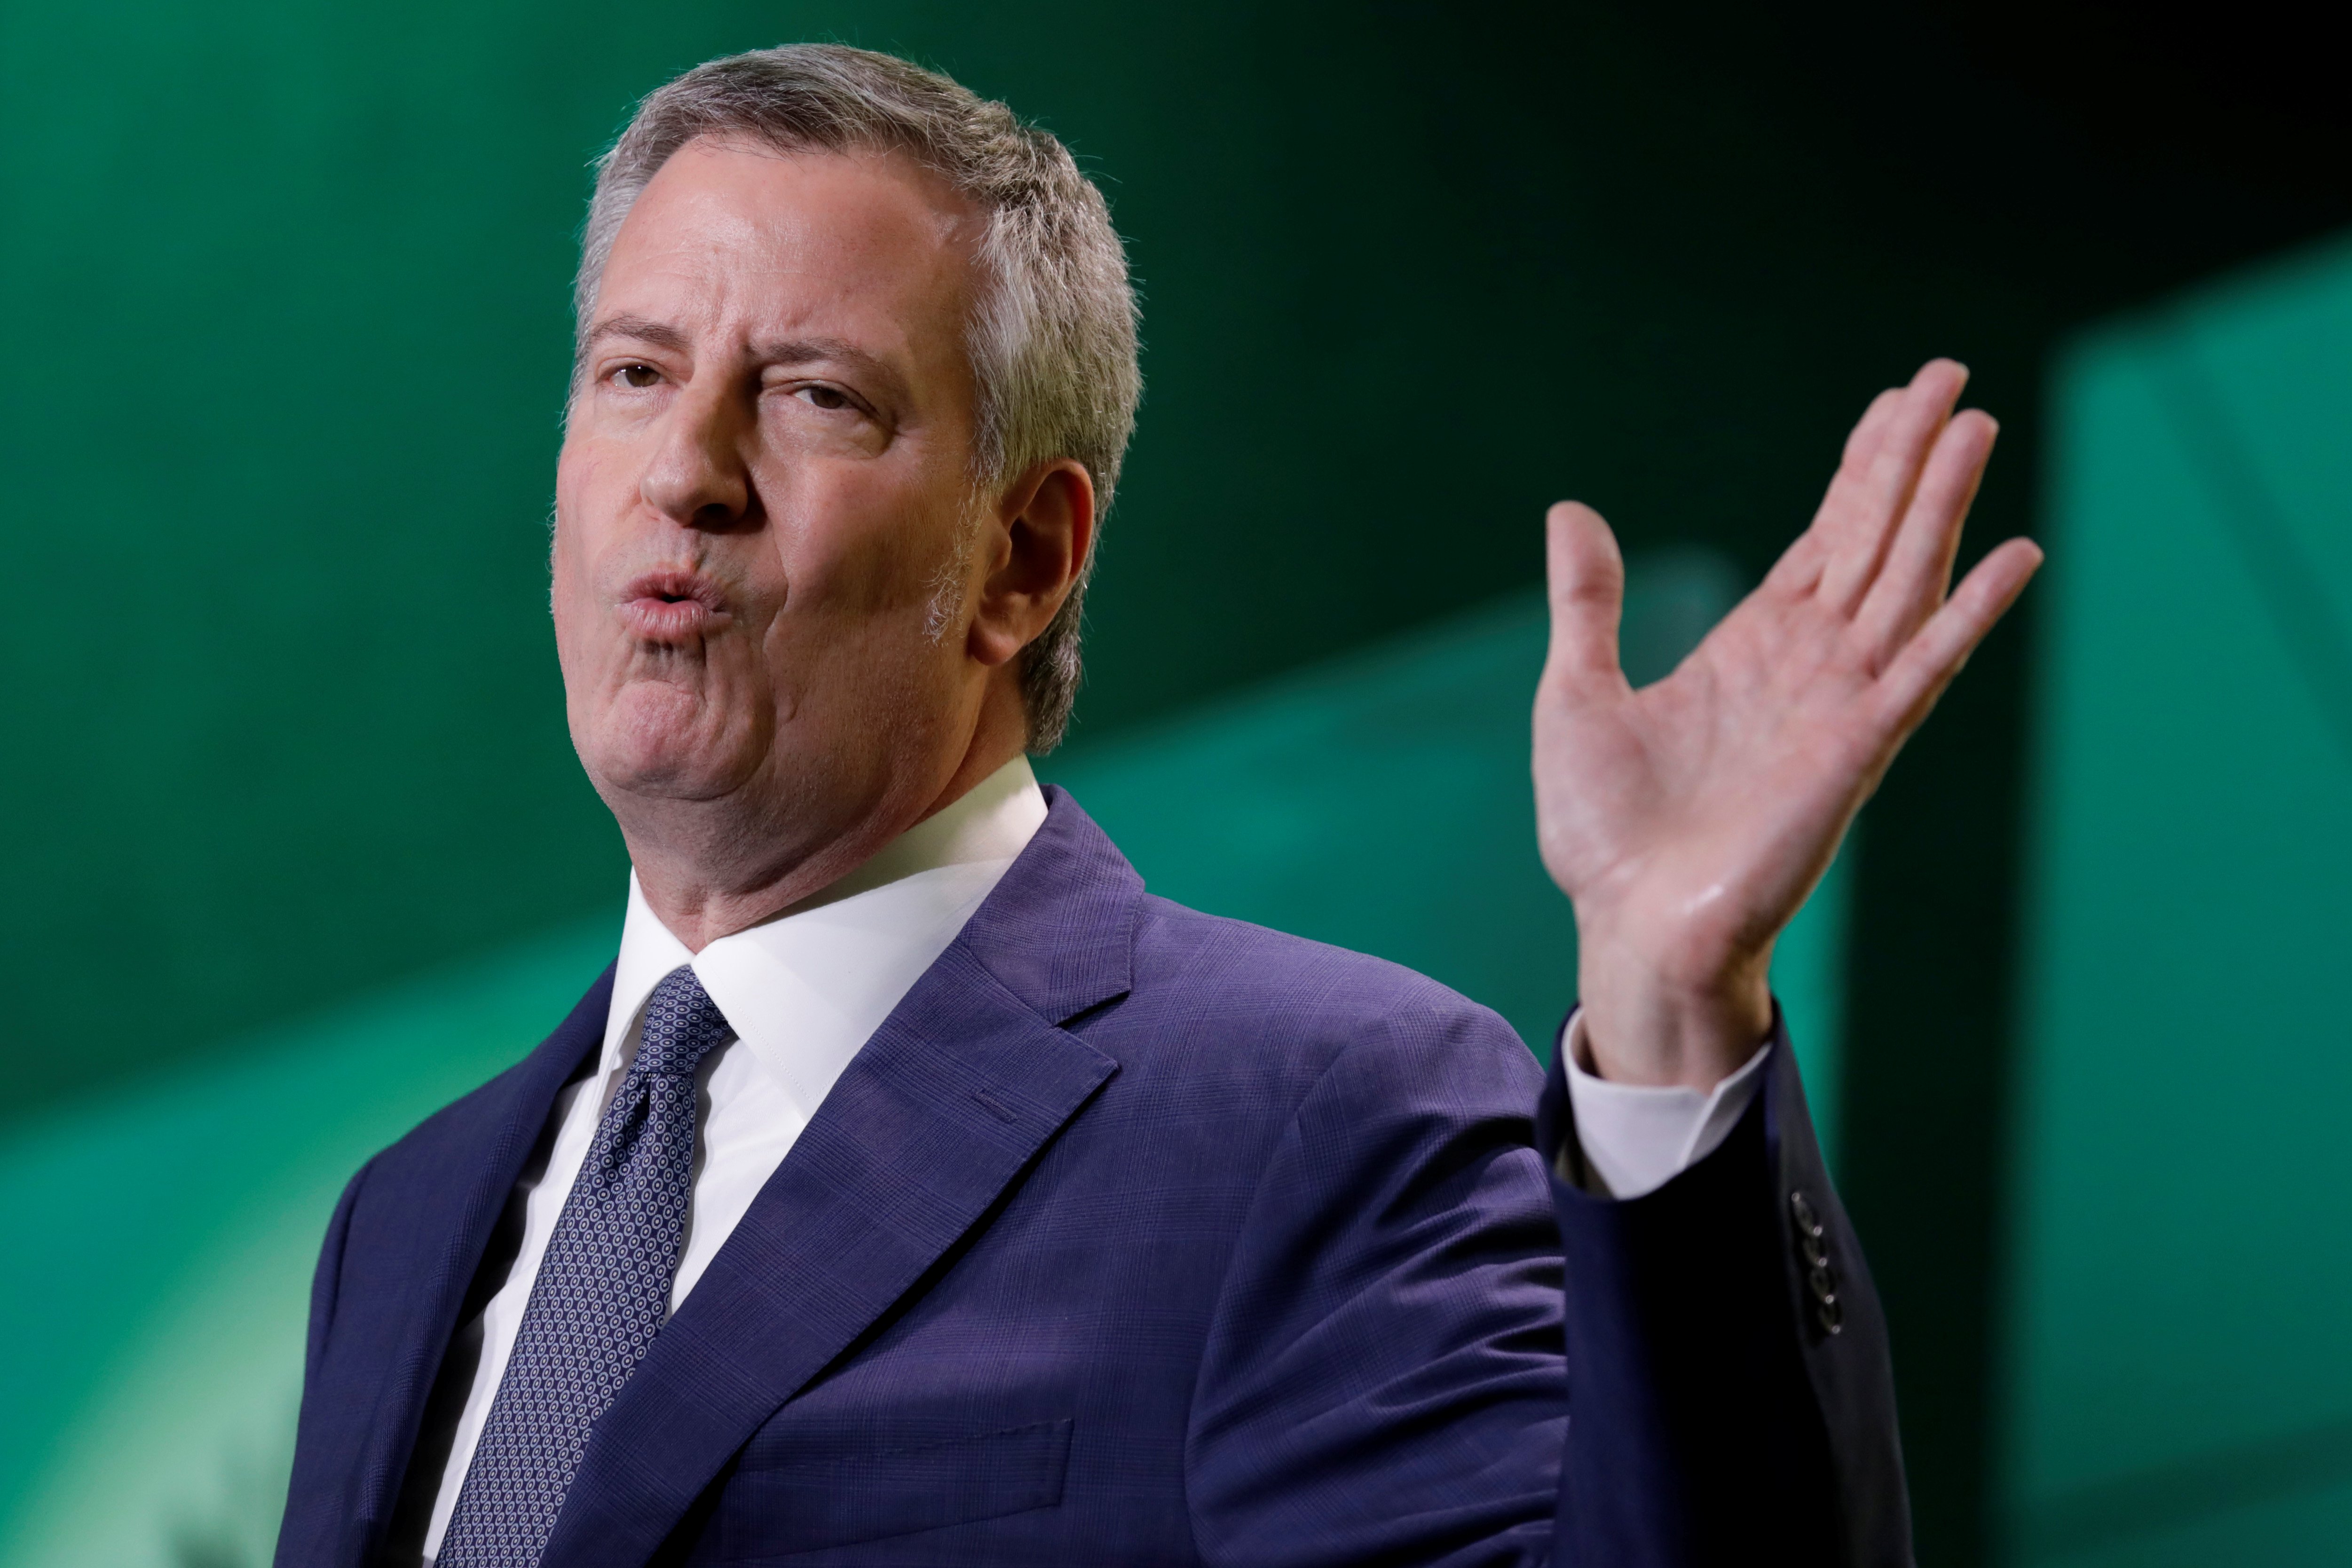 New York City Mayor Bill de Blasio delivers remarks at the United States Conference of Mayors winter meeting in Washington, U.S., January 24, 2019. REUTERS/Yuri Gripas